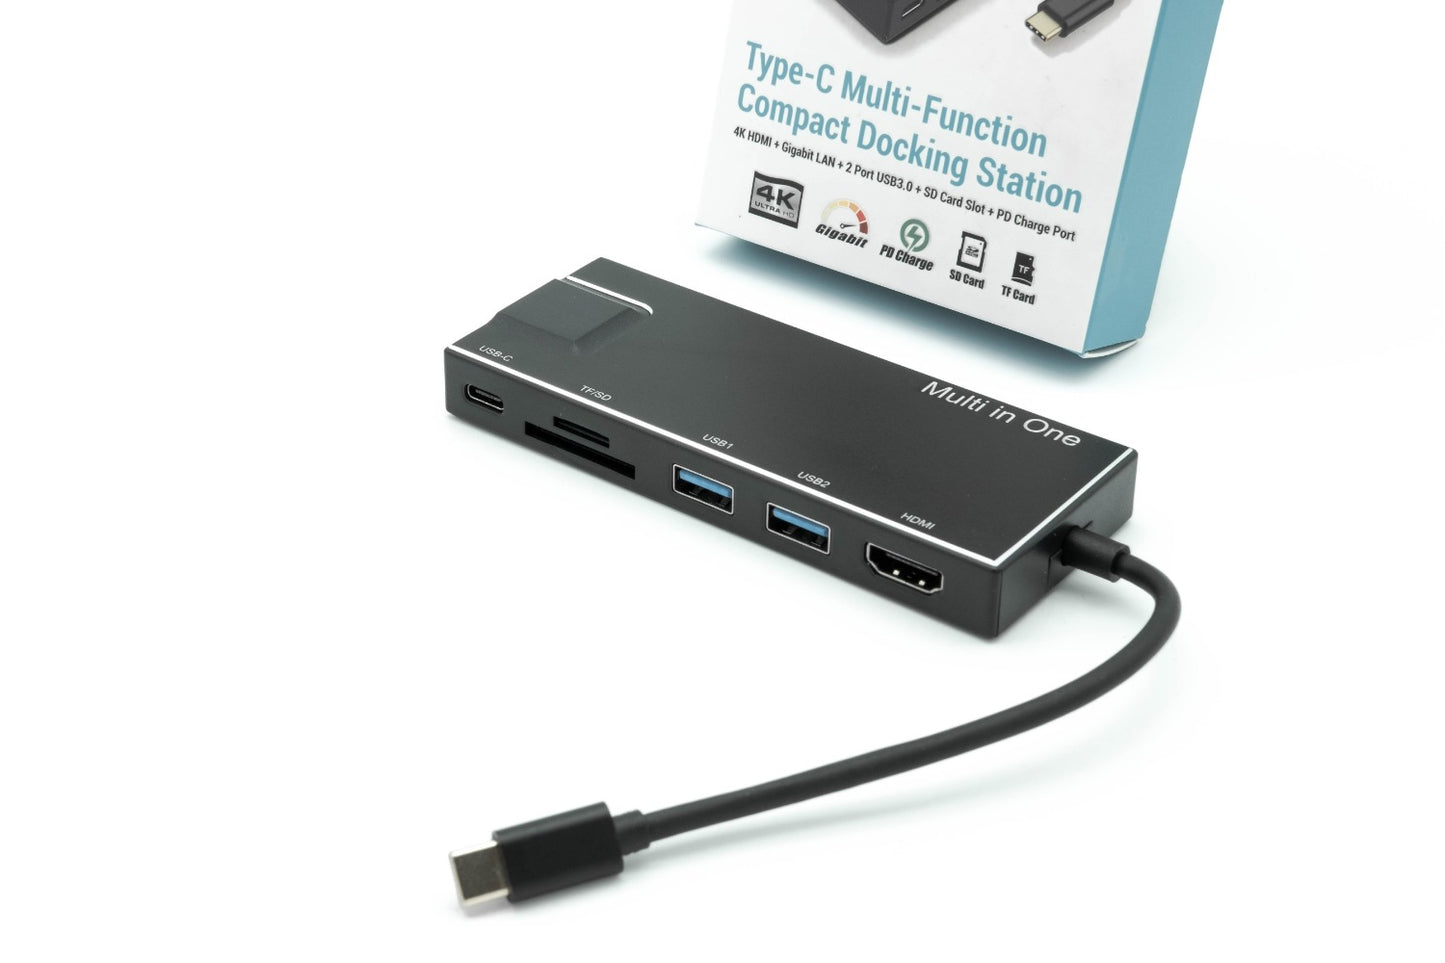 High-resolution HDMI 4K and multifunctional docking for Type-C